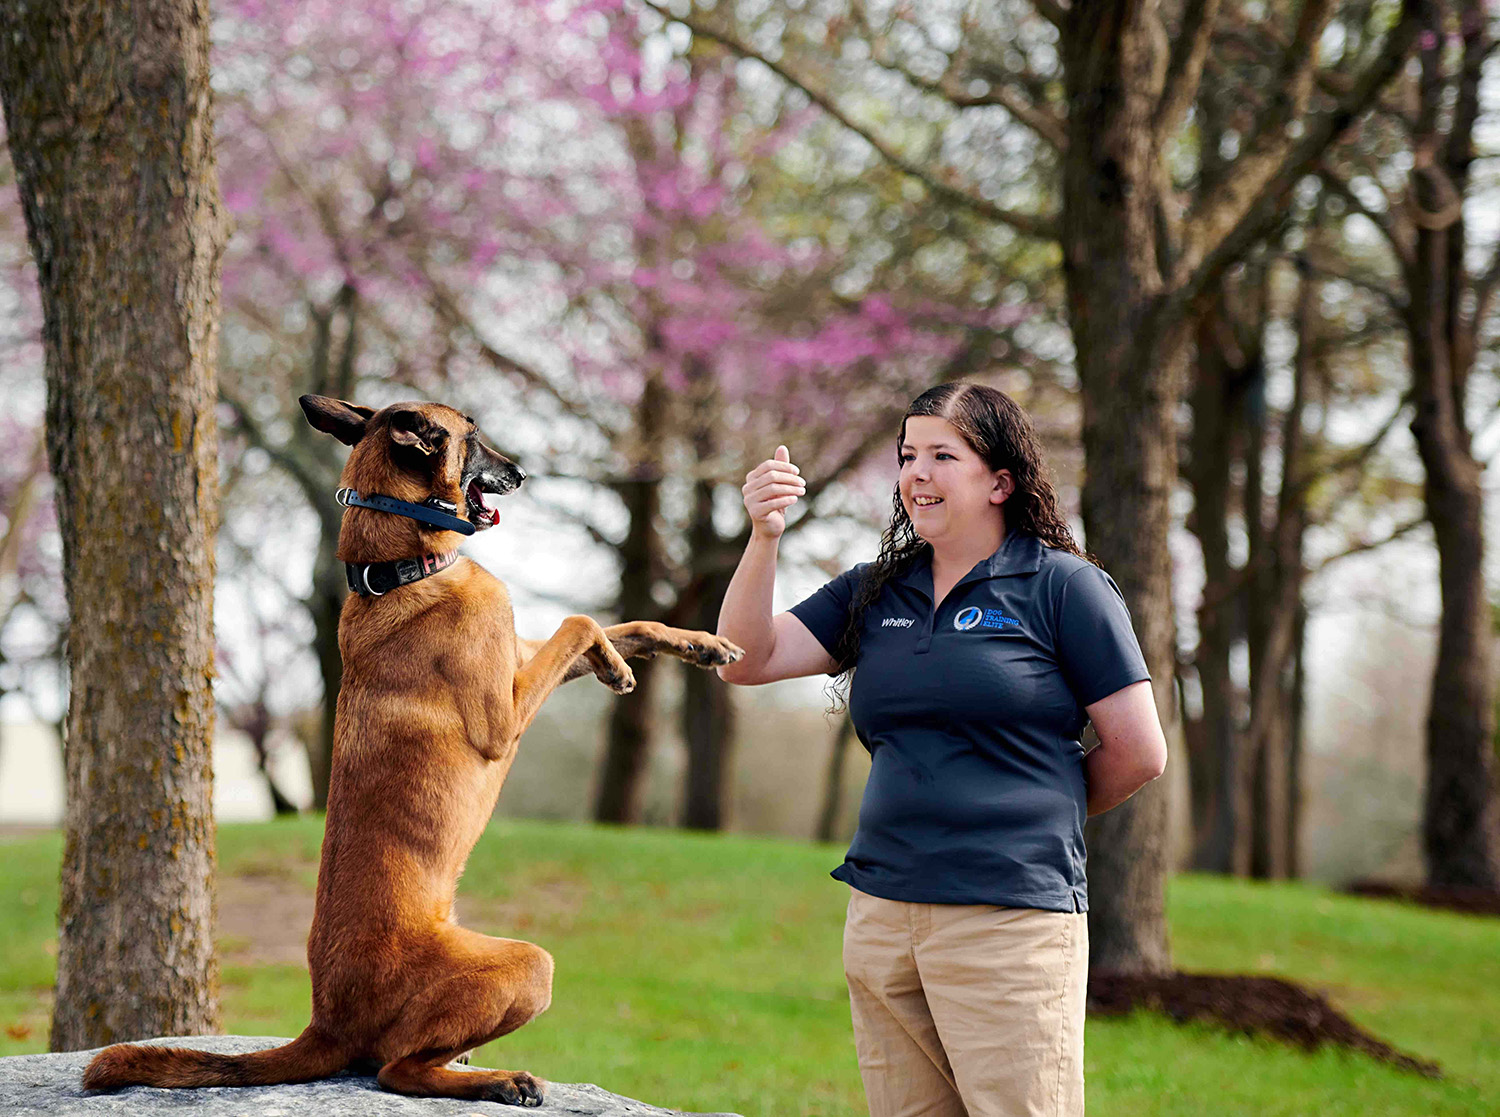 With so mamy options for pet franchises, Dog Training Elite outshines them all.